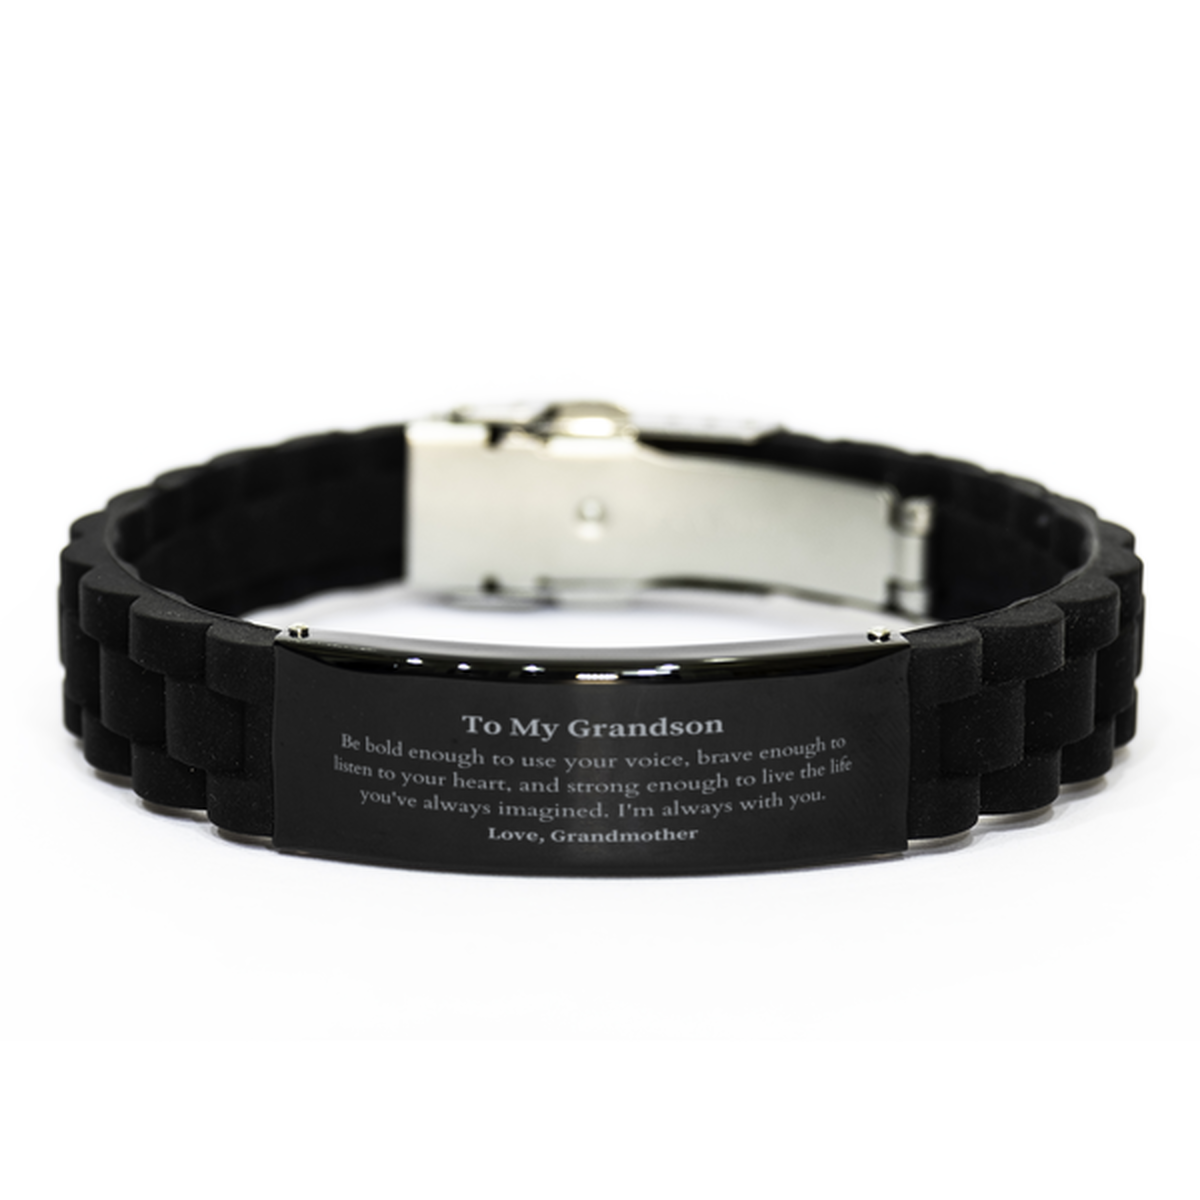 Keepsake Grandson Black Glidelock Clasp Bracelet Gift Idea Graduation Christmas Birthday Grandson from Grandmother, Grandson Be bold enough to use your voice, brave enough to listen to your heart. Love, Grandmother